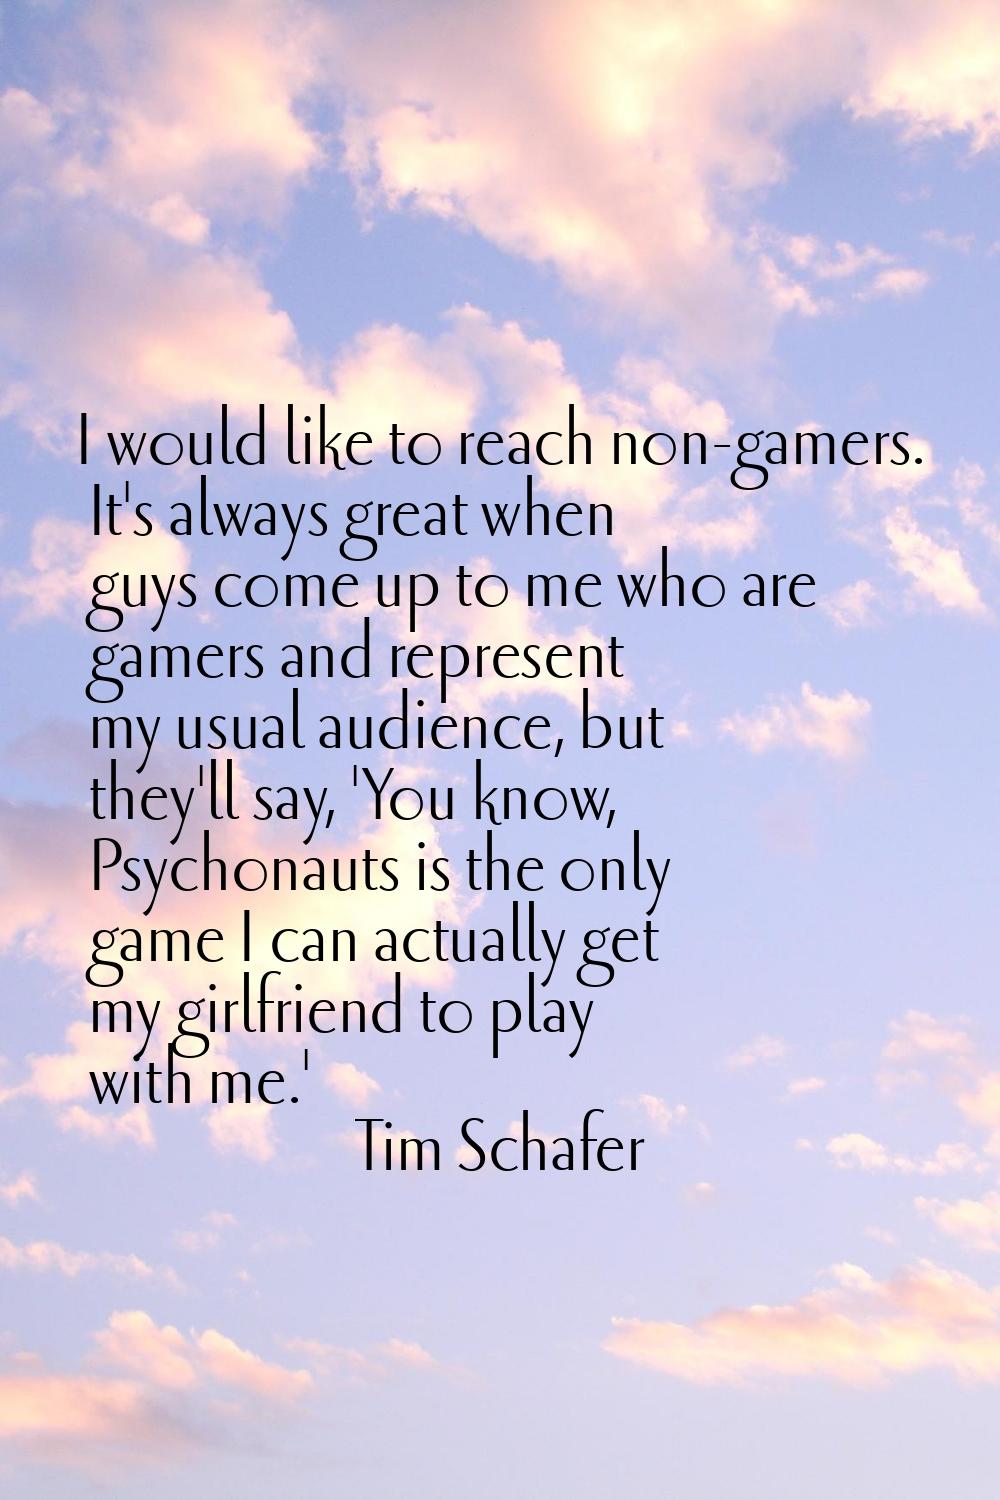 I would like to reach non-gamers. It's always great when guys come up to me who are gamers and repr